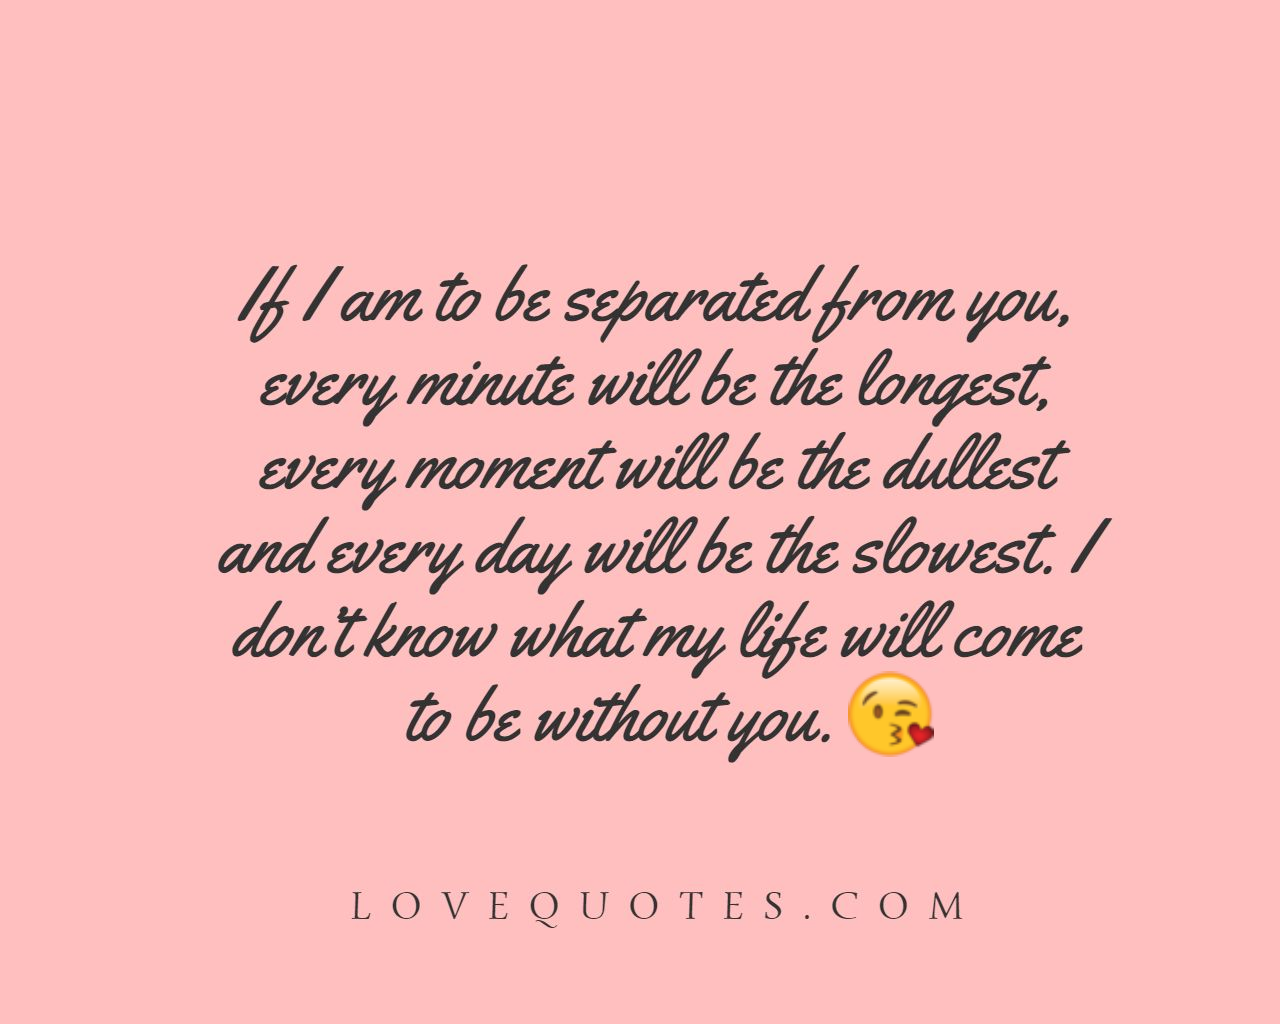 To Be Without You - Love Quotes